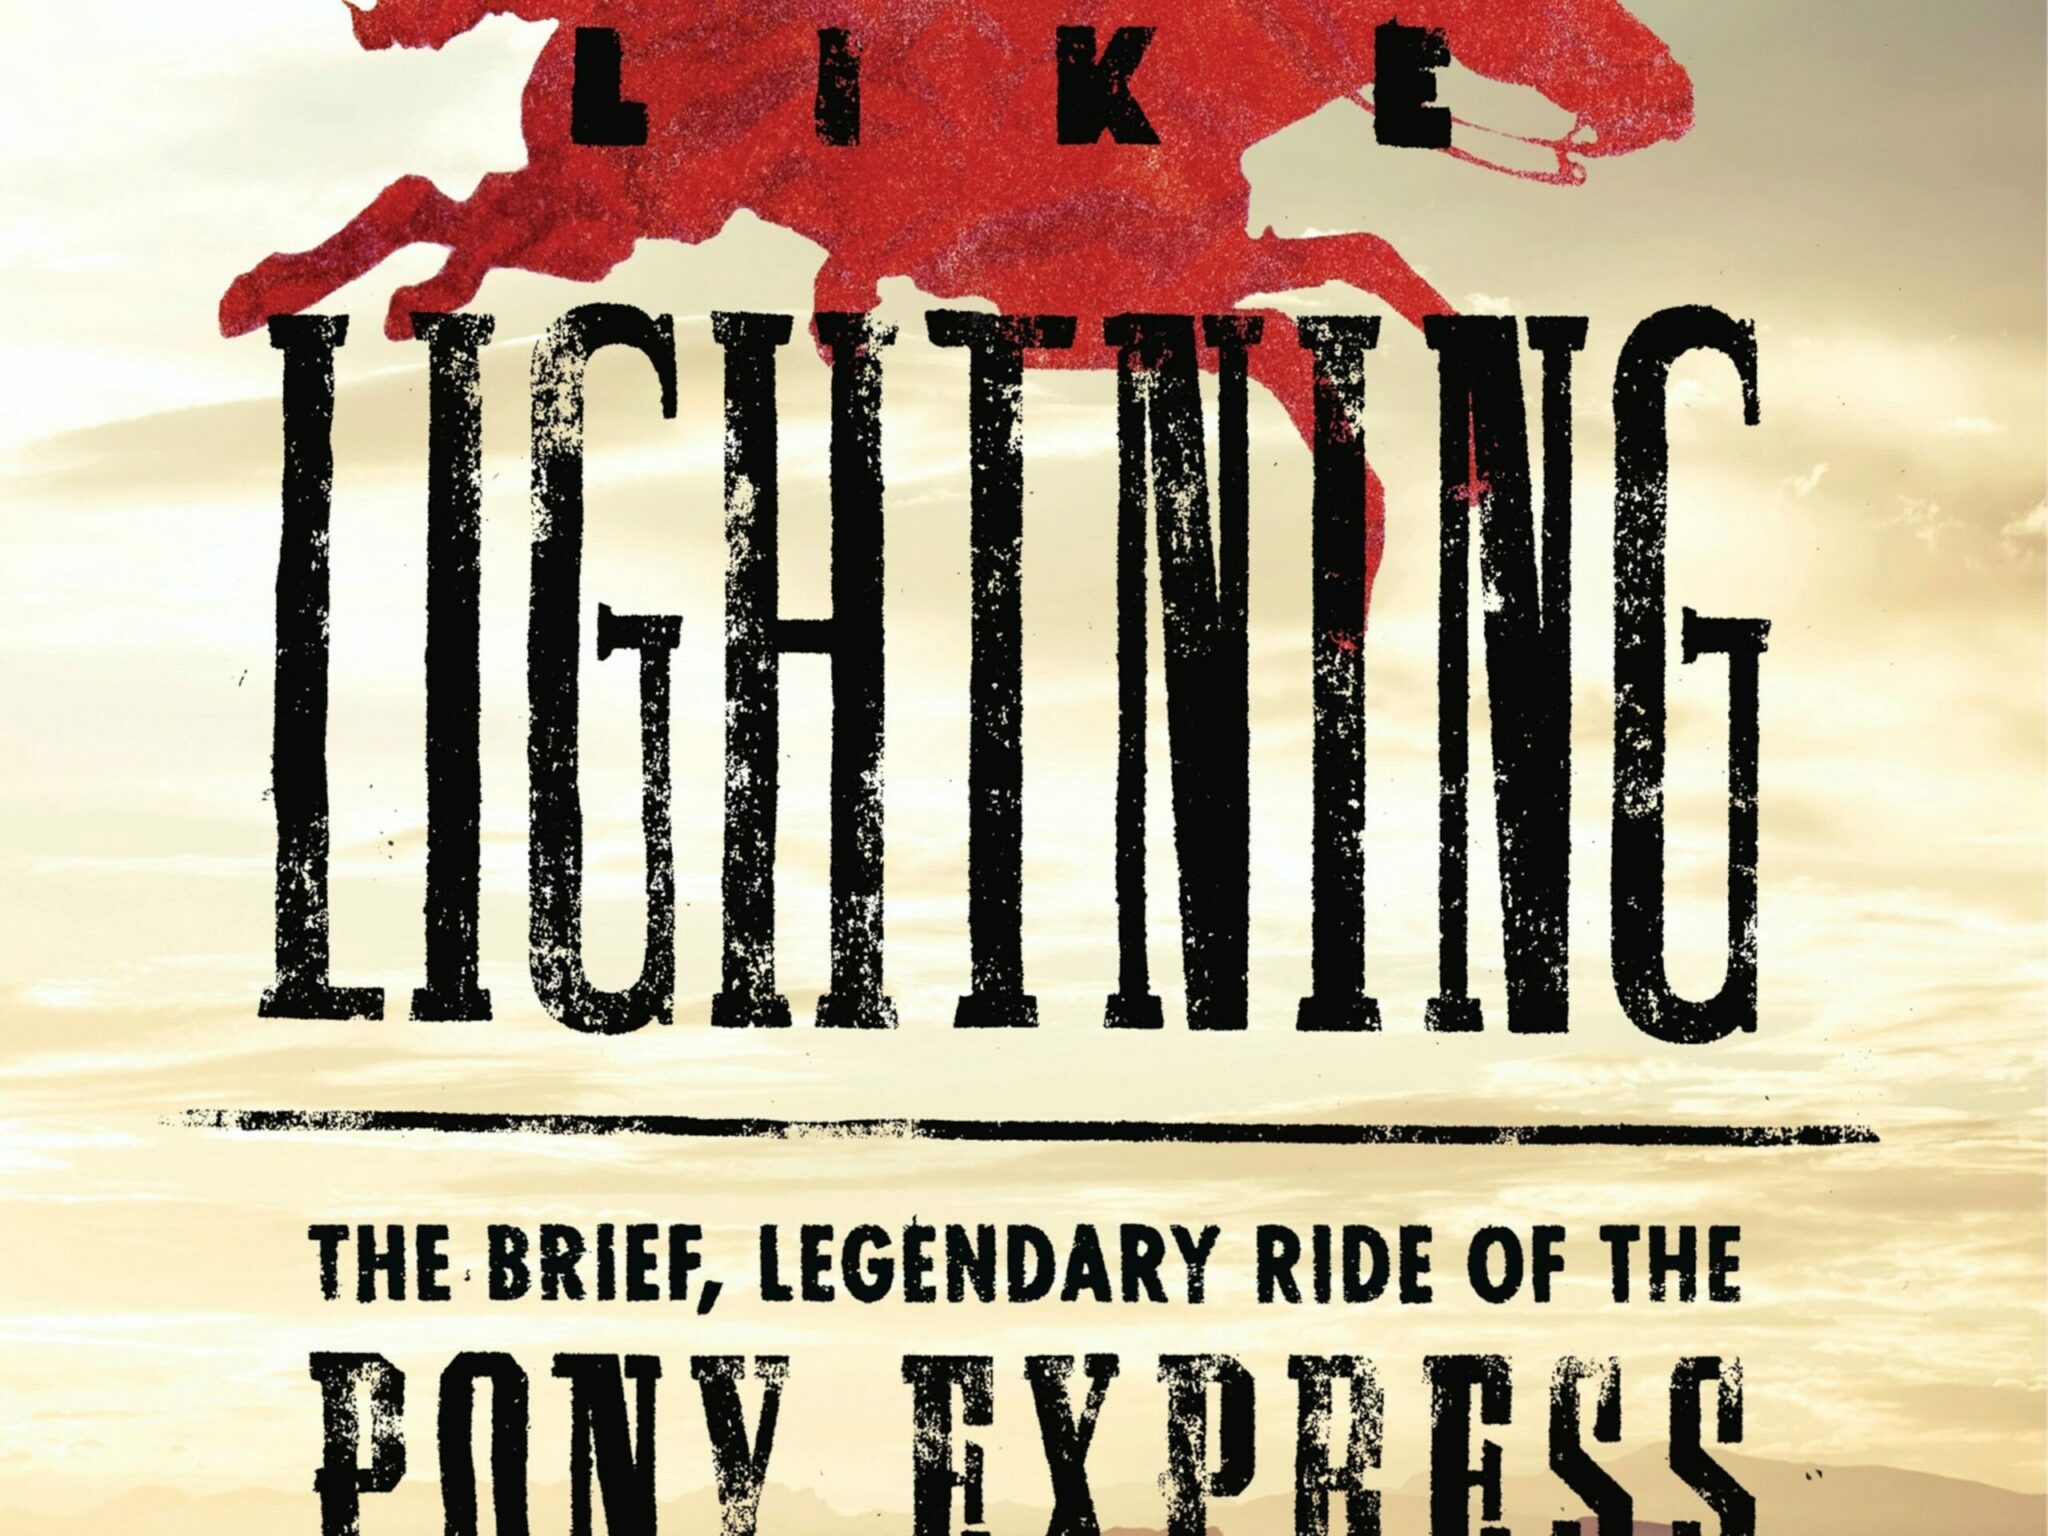 how many pony express riders were killed by indians and outlaws in the american old west scaled